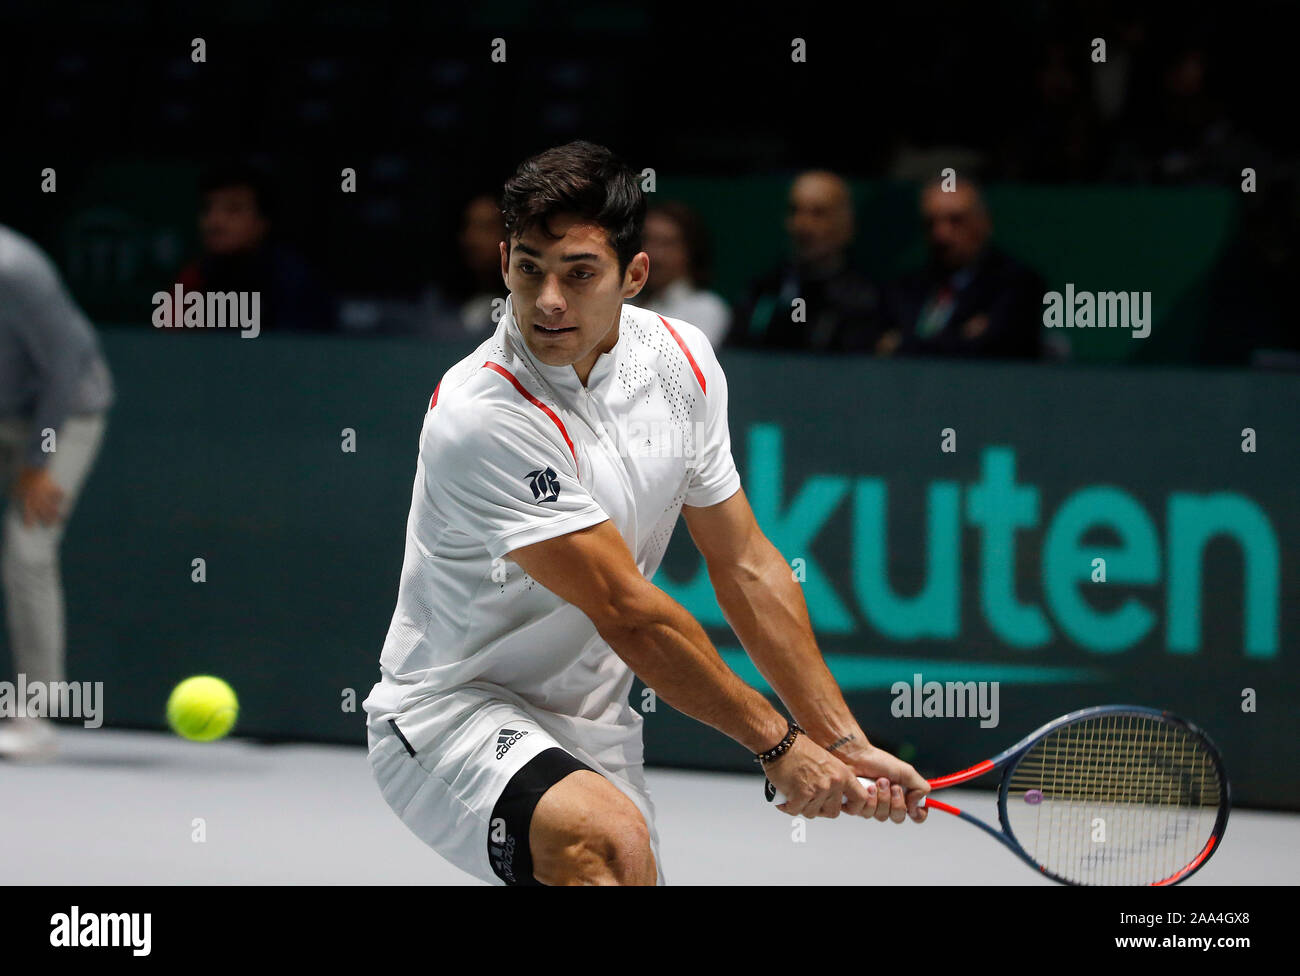 Cristian Garin of Chile in action during the singles match against Diego Schwartzman of Argentina on Day 2 of the 2019 Davis Cup at La Caja Magica. Stock Photo